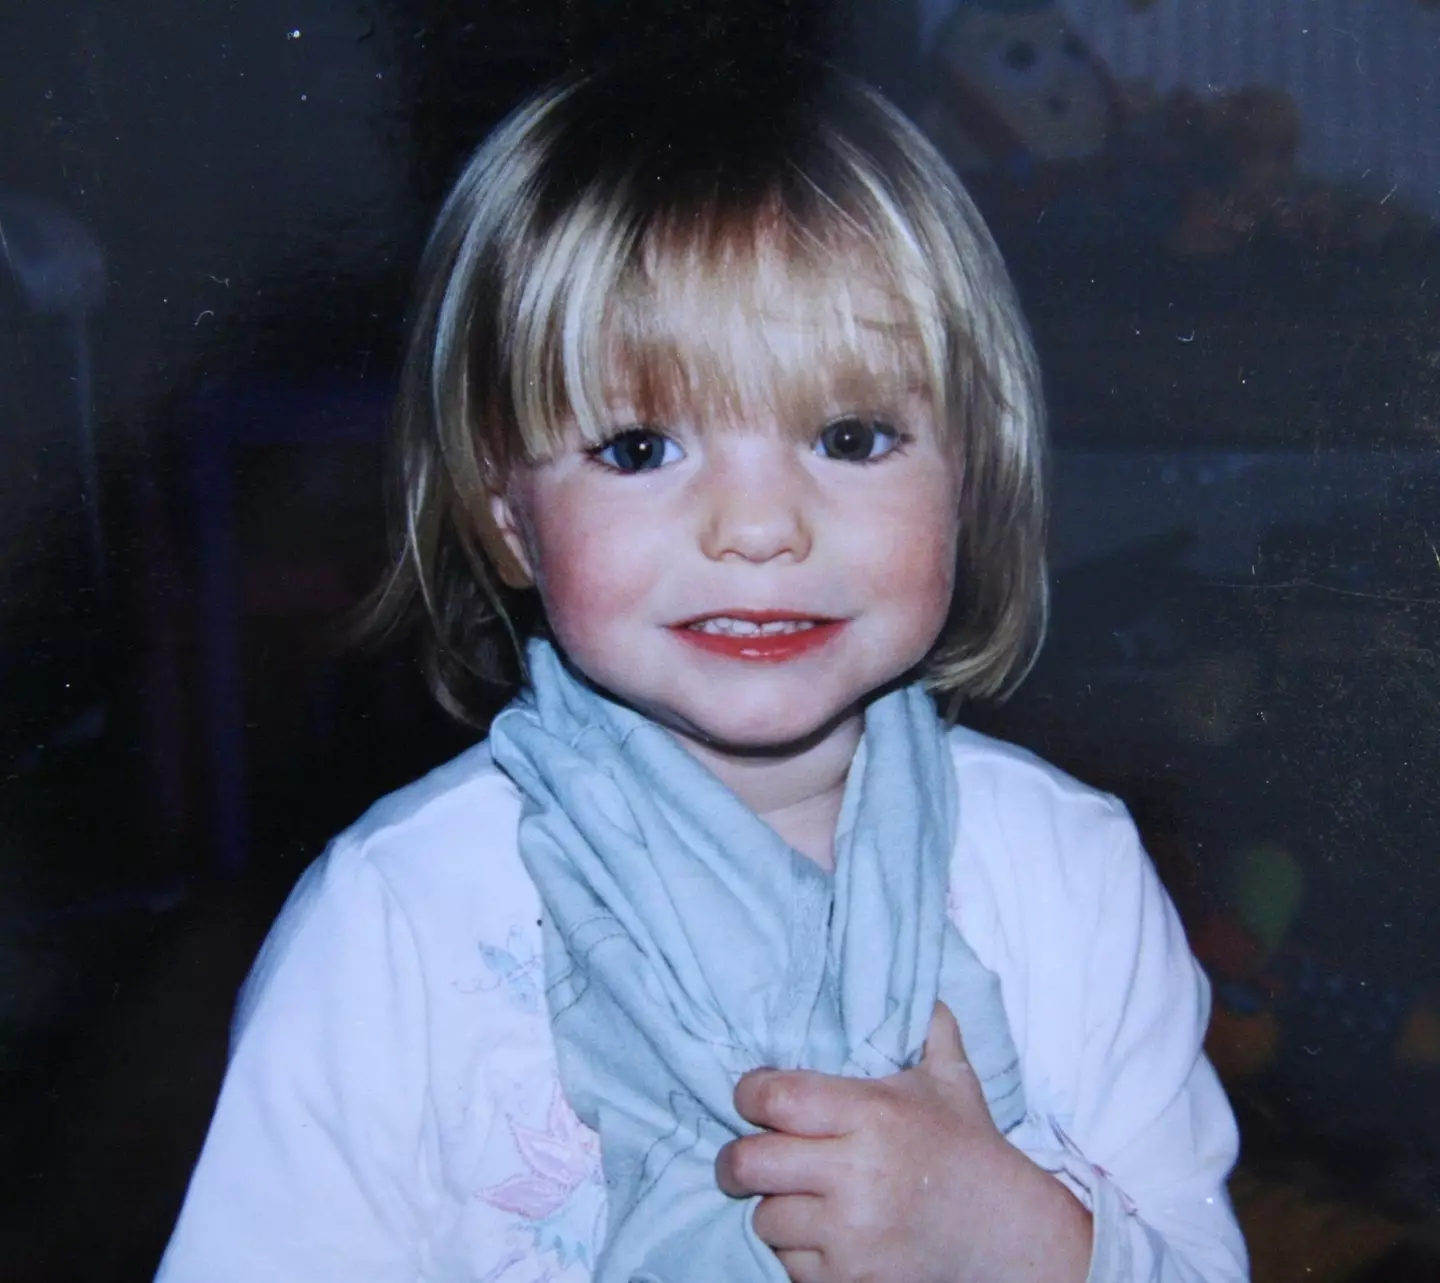 It has been 17 years since Madeleine McCann went missing. (Handout/Getty Images)